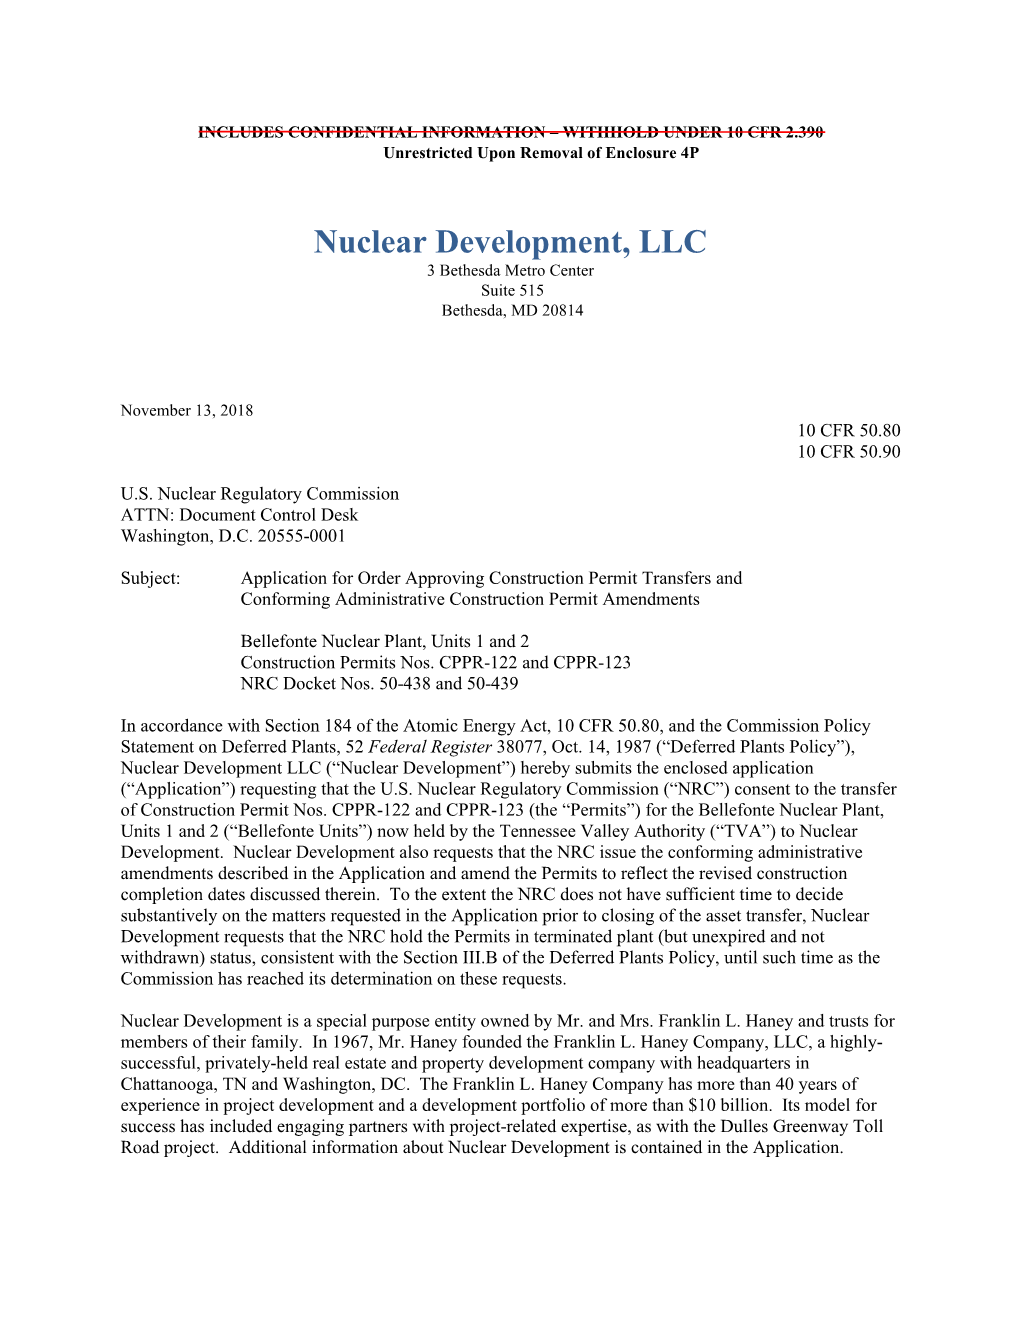 Bellefonte Nuclear Plant, Units 1 and 2 Construction Permits Nos